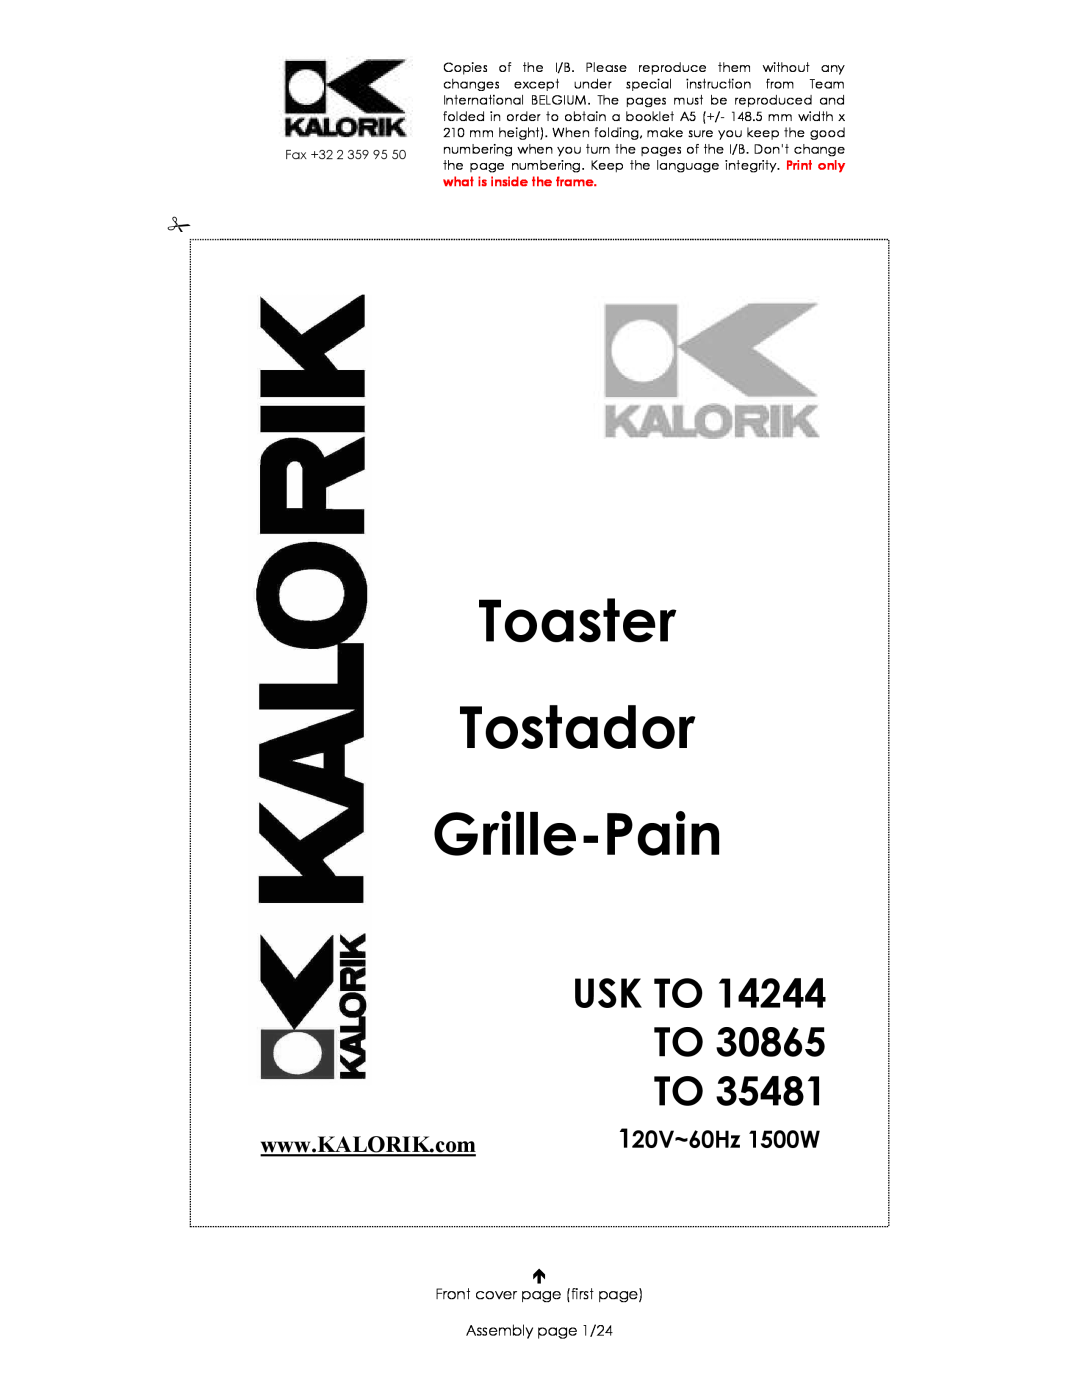 Kalorik 14244 manual Toaster Tostador Grille-Pain, Usk To, 120V~60Hz 1500W, Front cover page first page Assembly page 1/24 